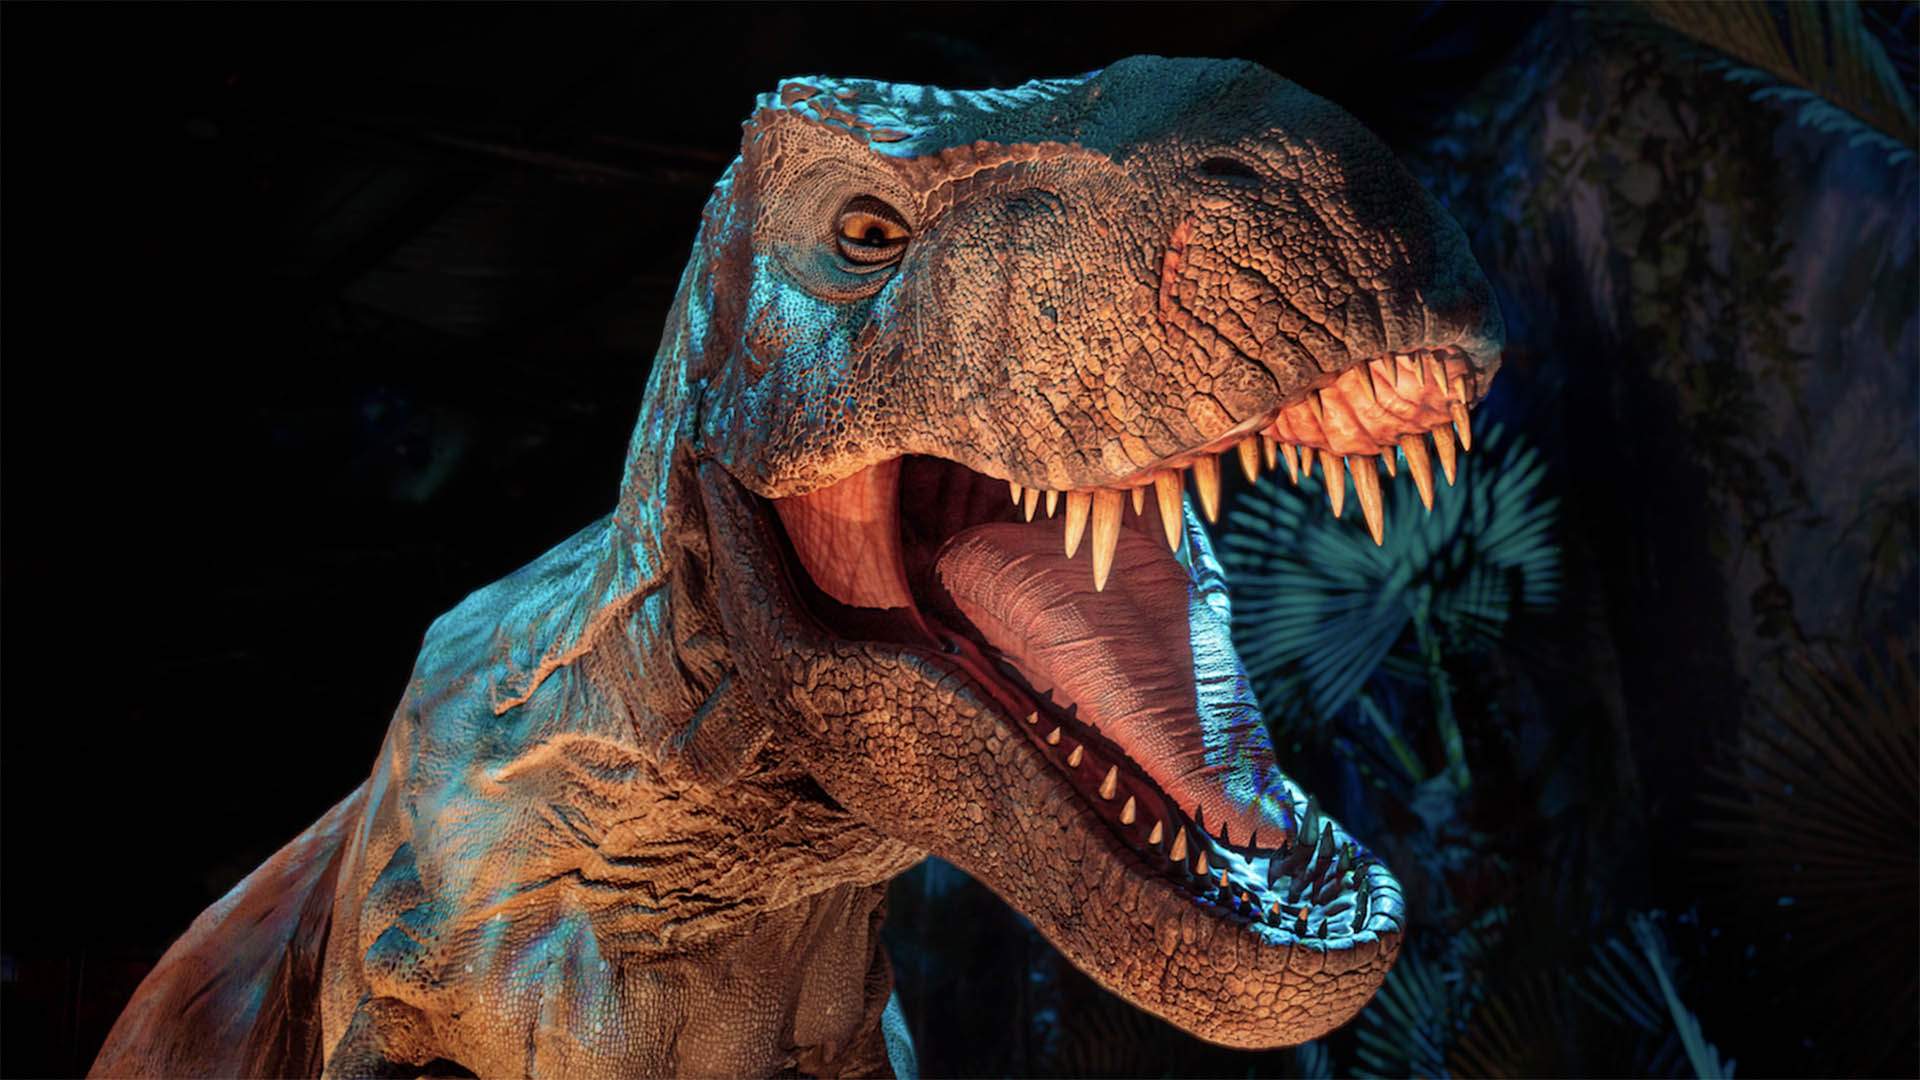 'Jurassic World: The Exhibition' Is Roaring Into Sydney for the Dinosaur Franchise's 30th Anniversary